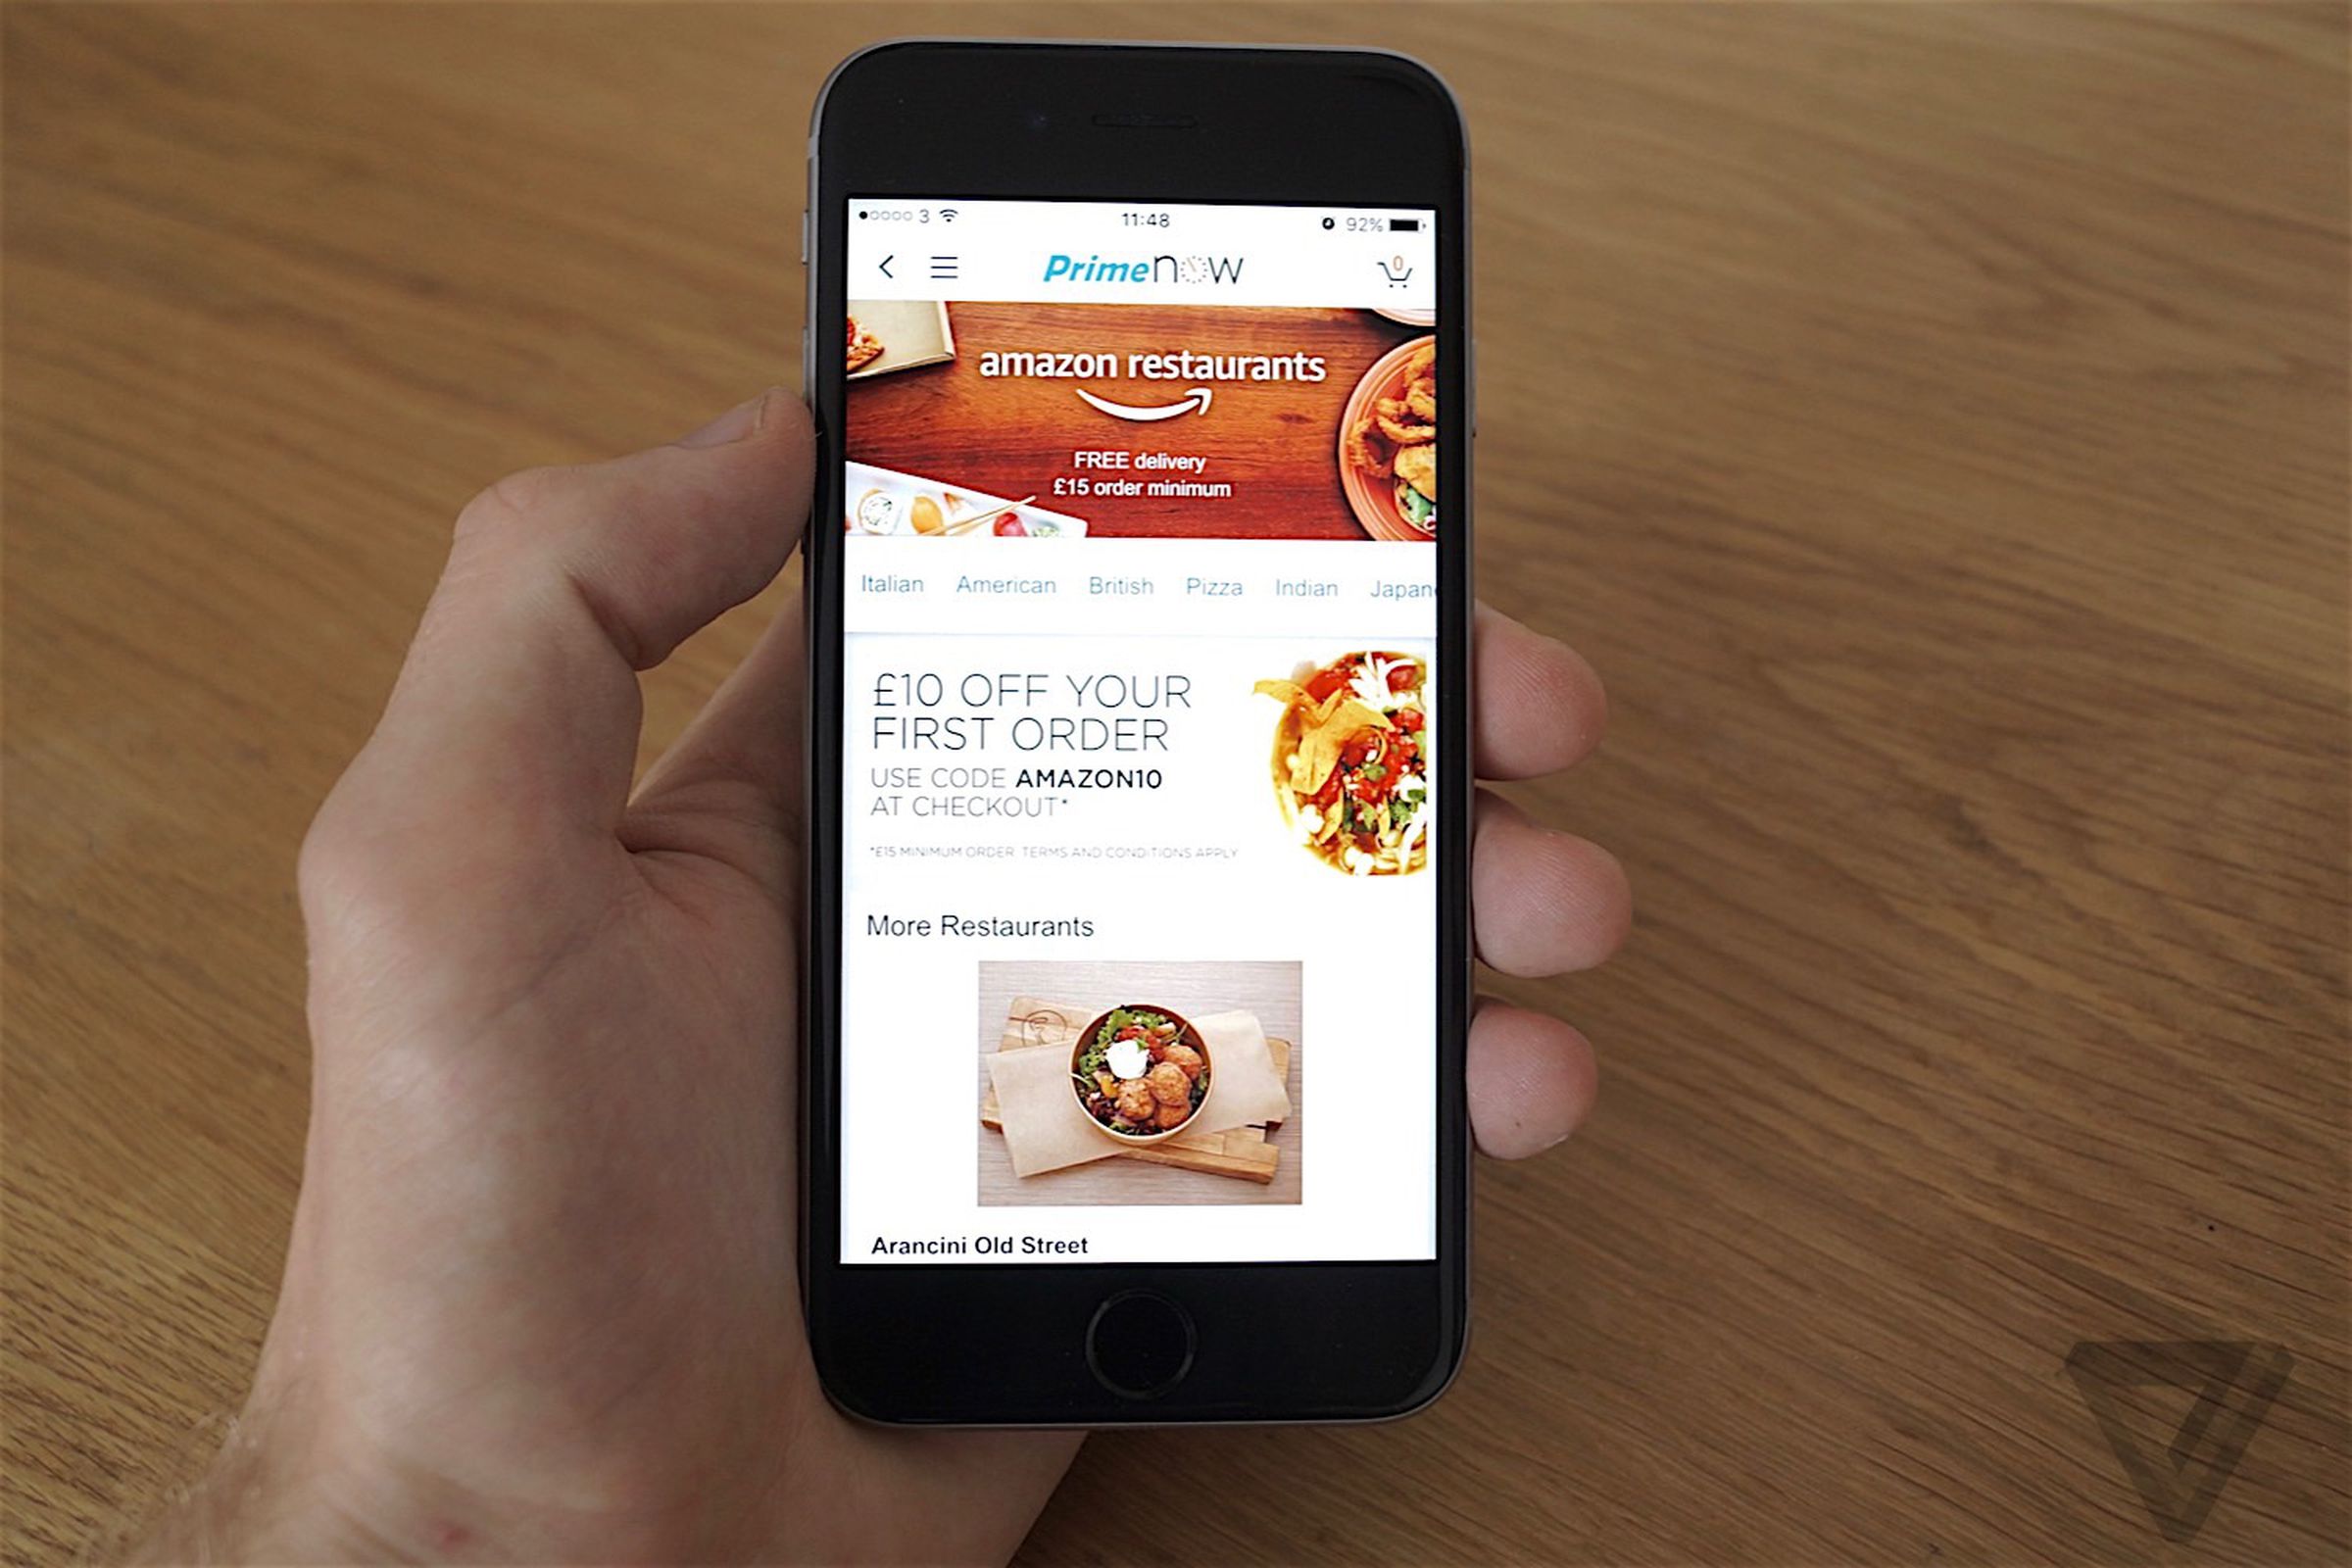 Amazon Restaurants is available through the Prime Now app in London. 